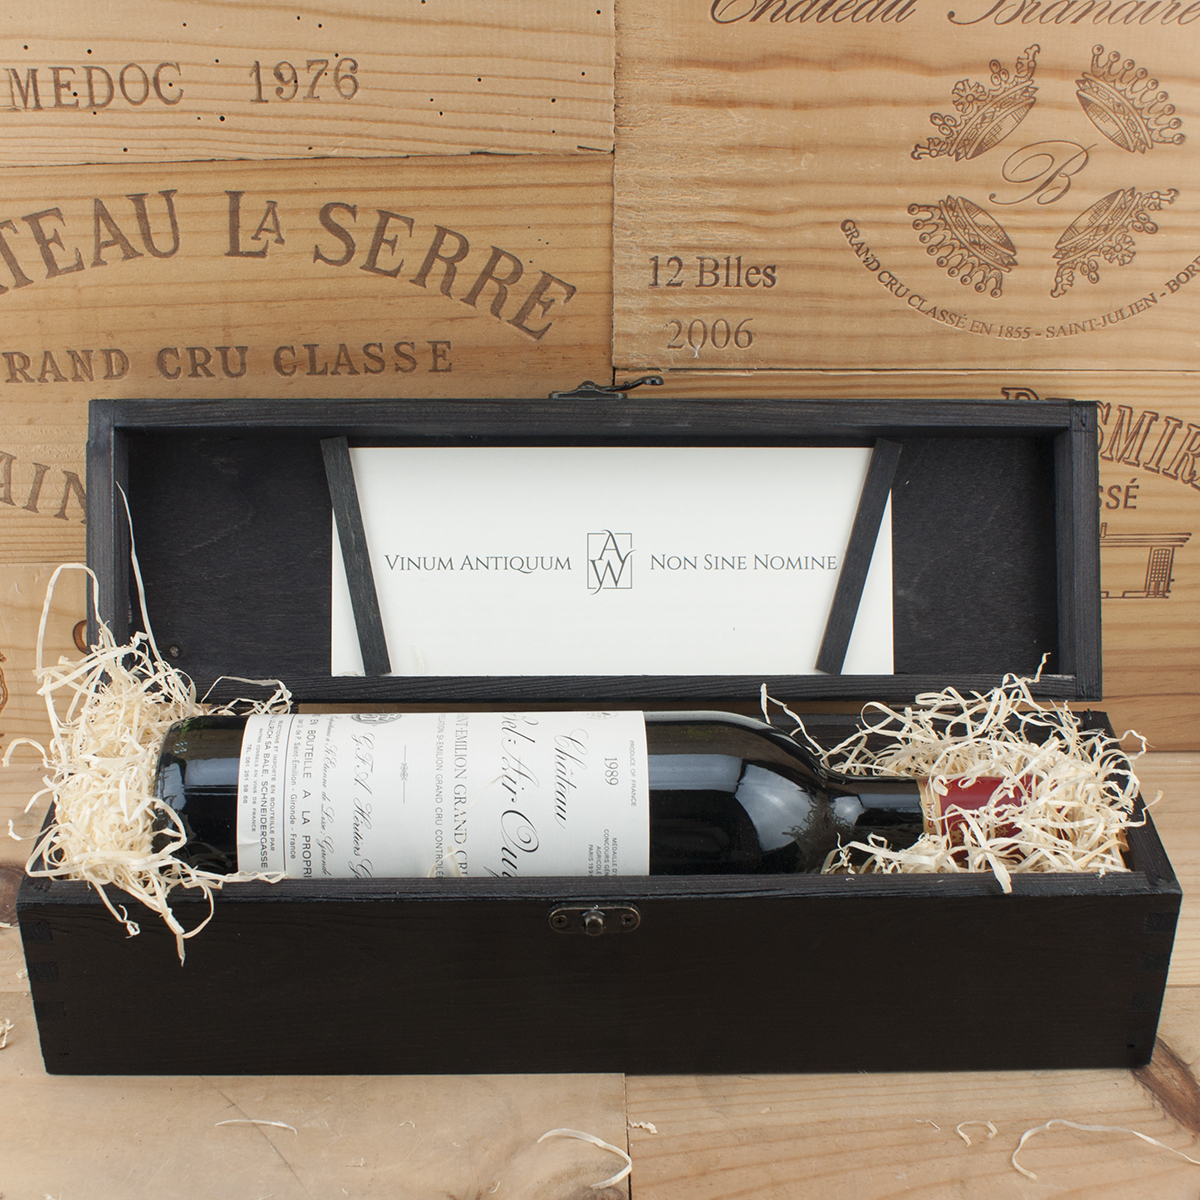 1989 Chateau Bel Air Ouy in the black box